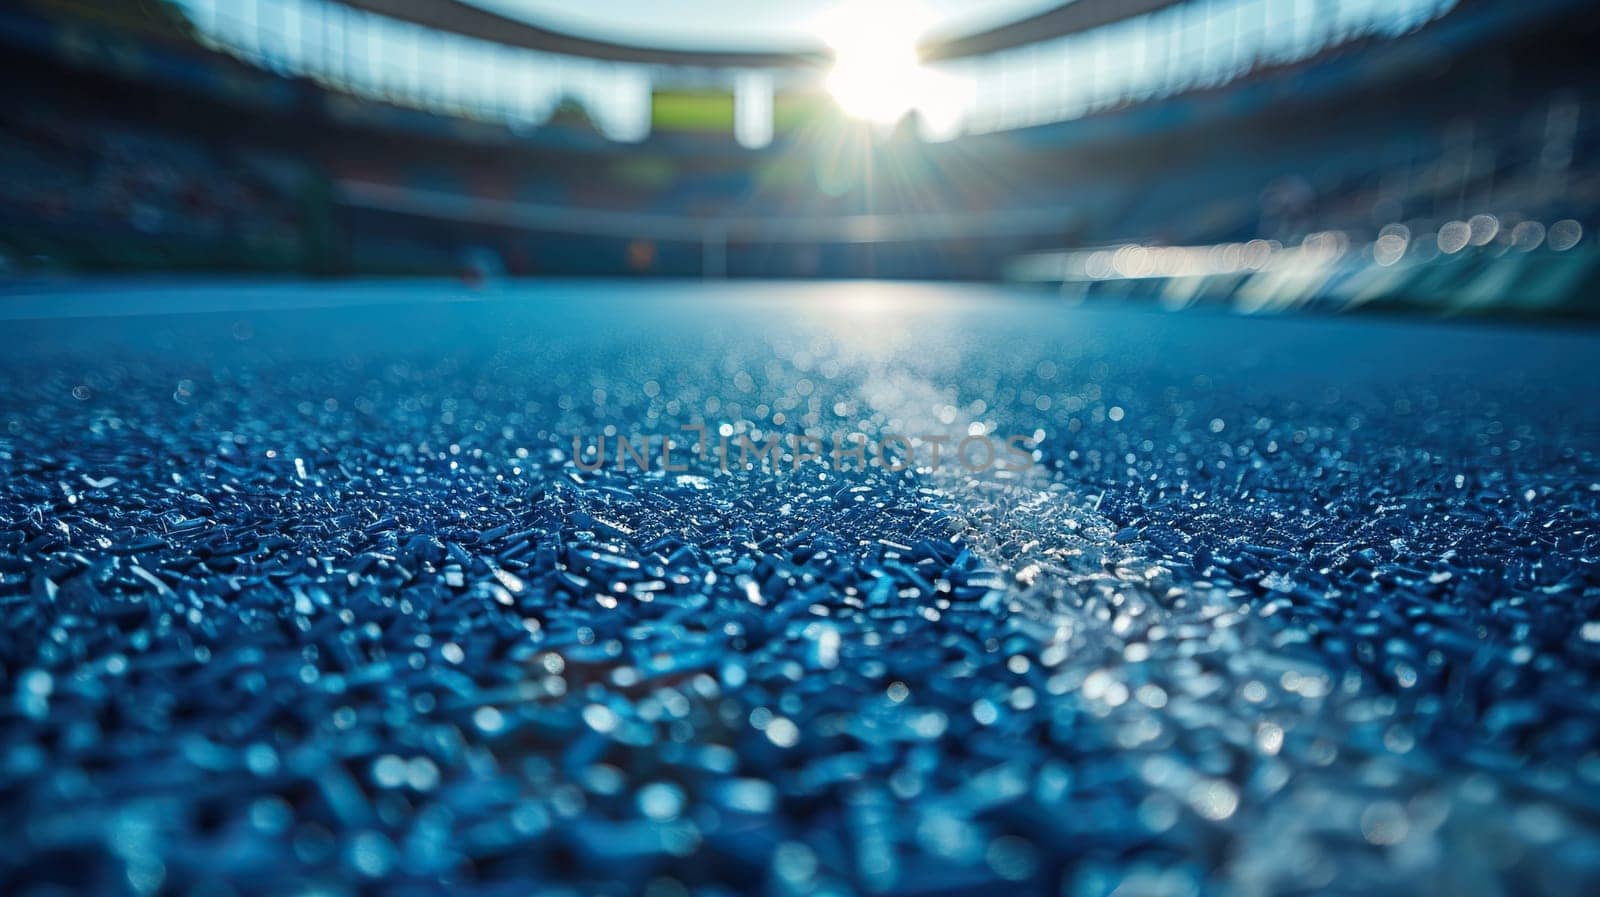 Close-up of a tennis court with blue turf. Ground level shot. Generated by artificial intelligence by Vovmar